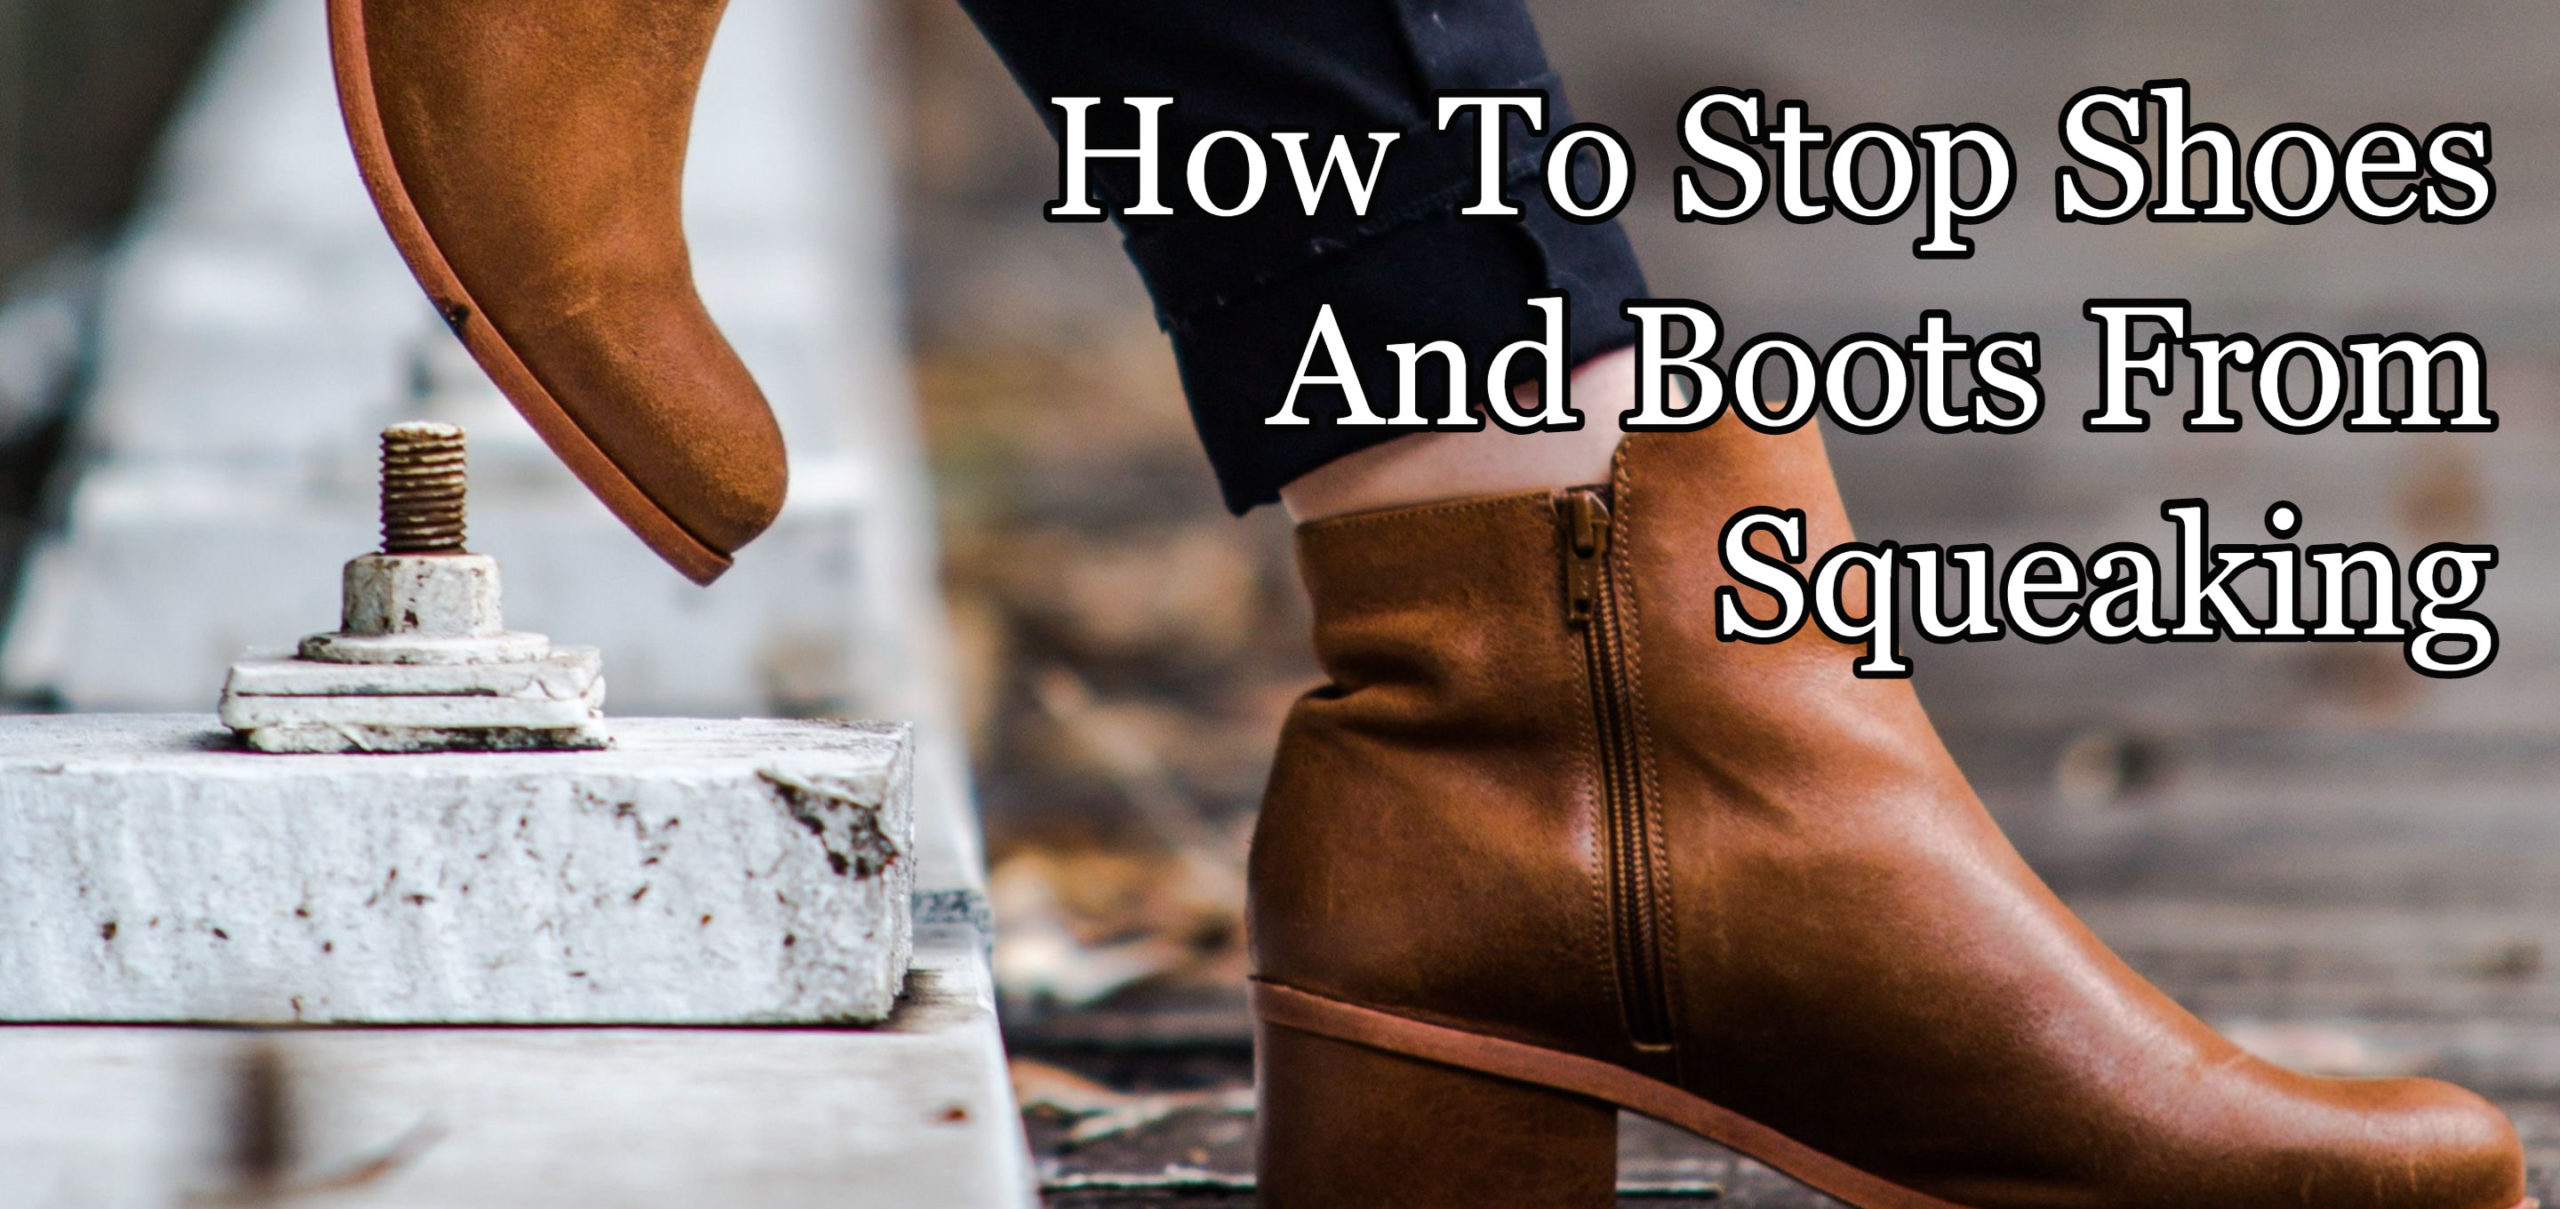 How To Stop Boots From Squeaking – Shoes Too!